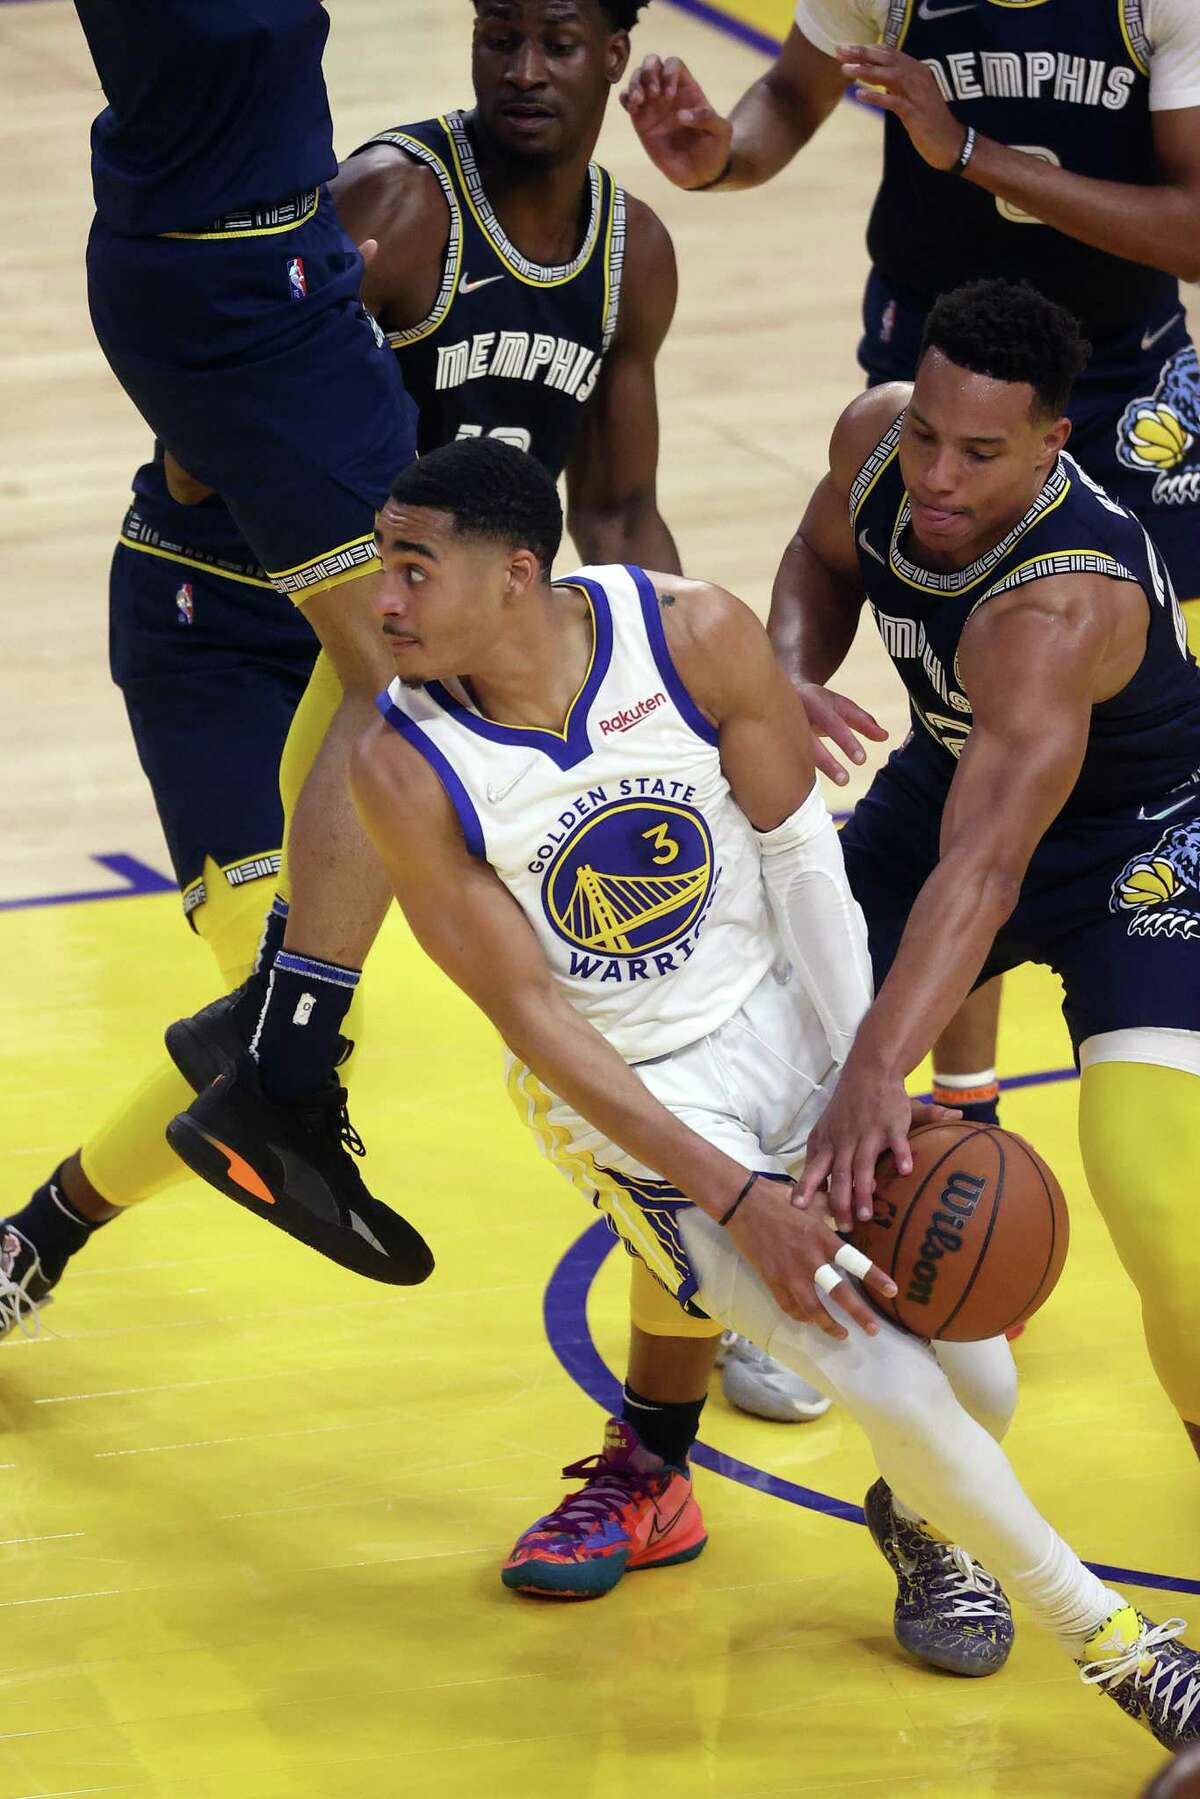 Golden State Warriors’ Jordan Poole has the ball stolen by Memphis Grizzlies’ Desmond Bane in 2nd quarter during Game 4 of NBA Western Conference Semifinals at Chase Center in San Francisco, Calif., on Monday, May 9, 2022.